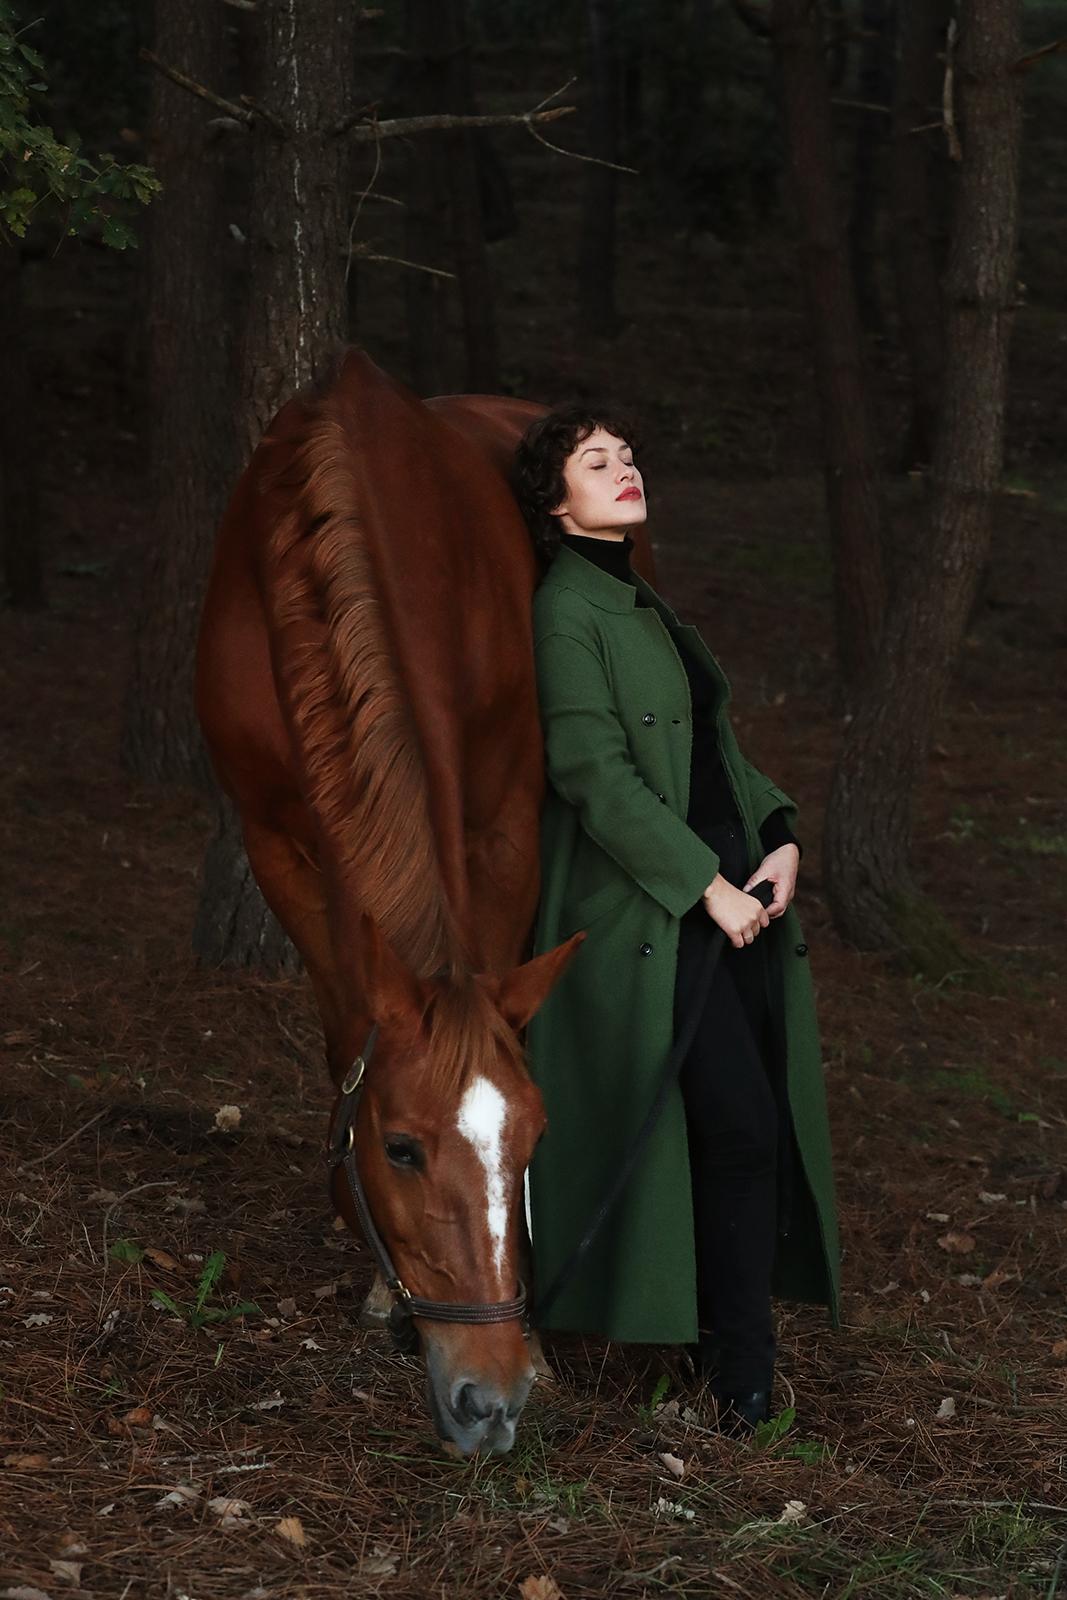 Laurent Campus Color Photograph - Utopia - Signed limited edition print, Color, Contemporary, Horse and actress